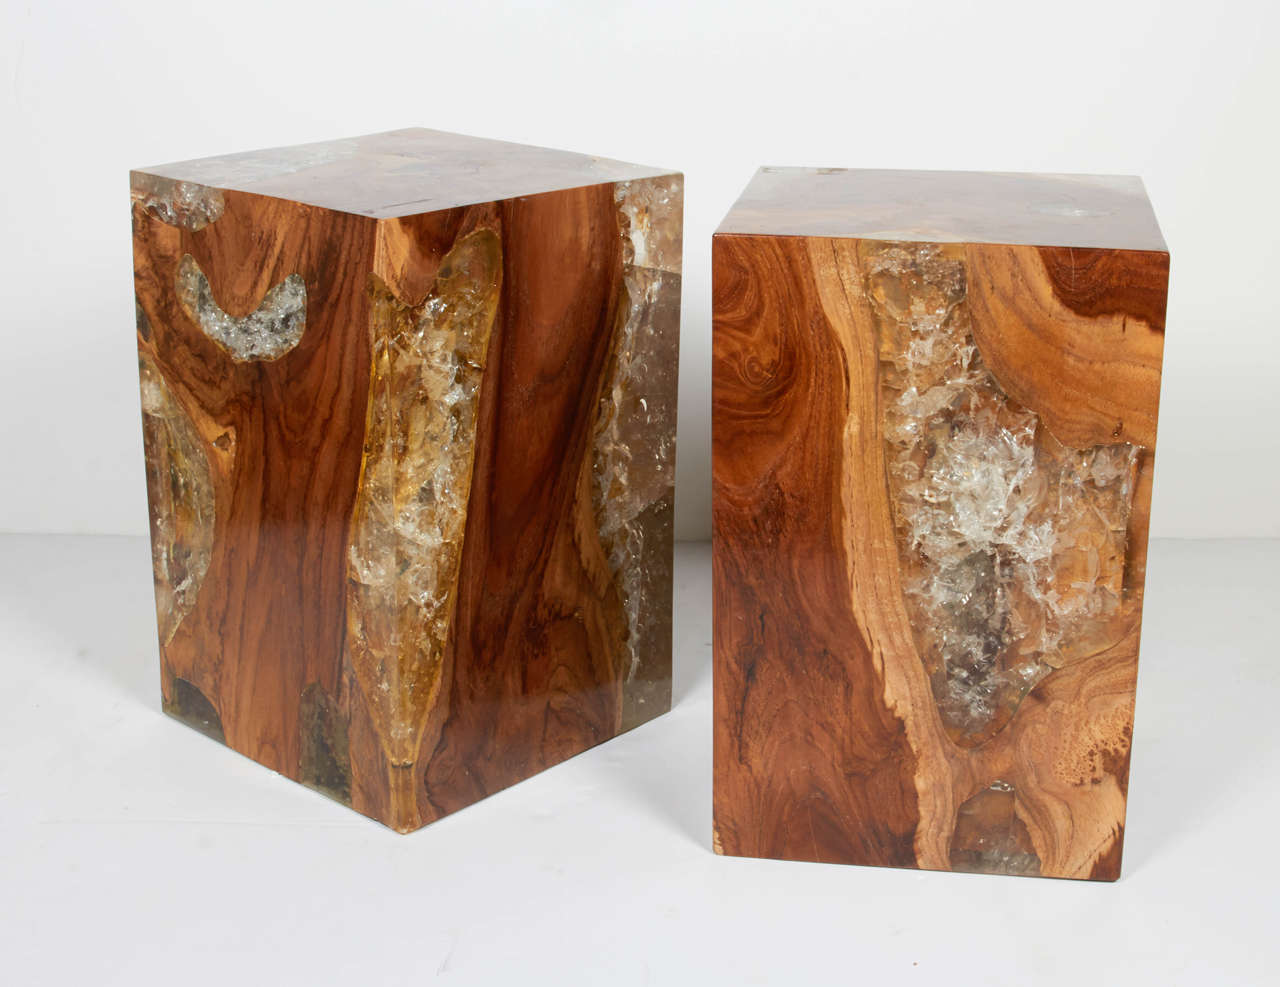 Pair of outstanding pedestal tables with cube form. Comprised of a combination of natural reclaimed teak wood with crystalized cracked resin. Versatile shape and size allow for dual purpose tables and seating. Highly polished wood and resin finish